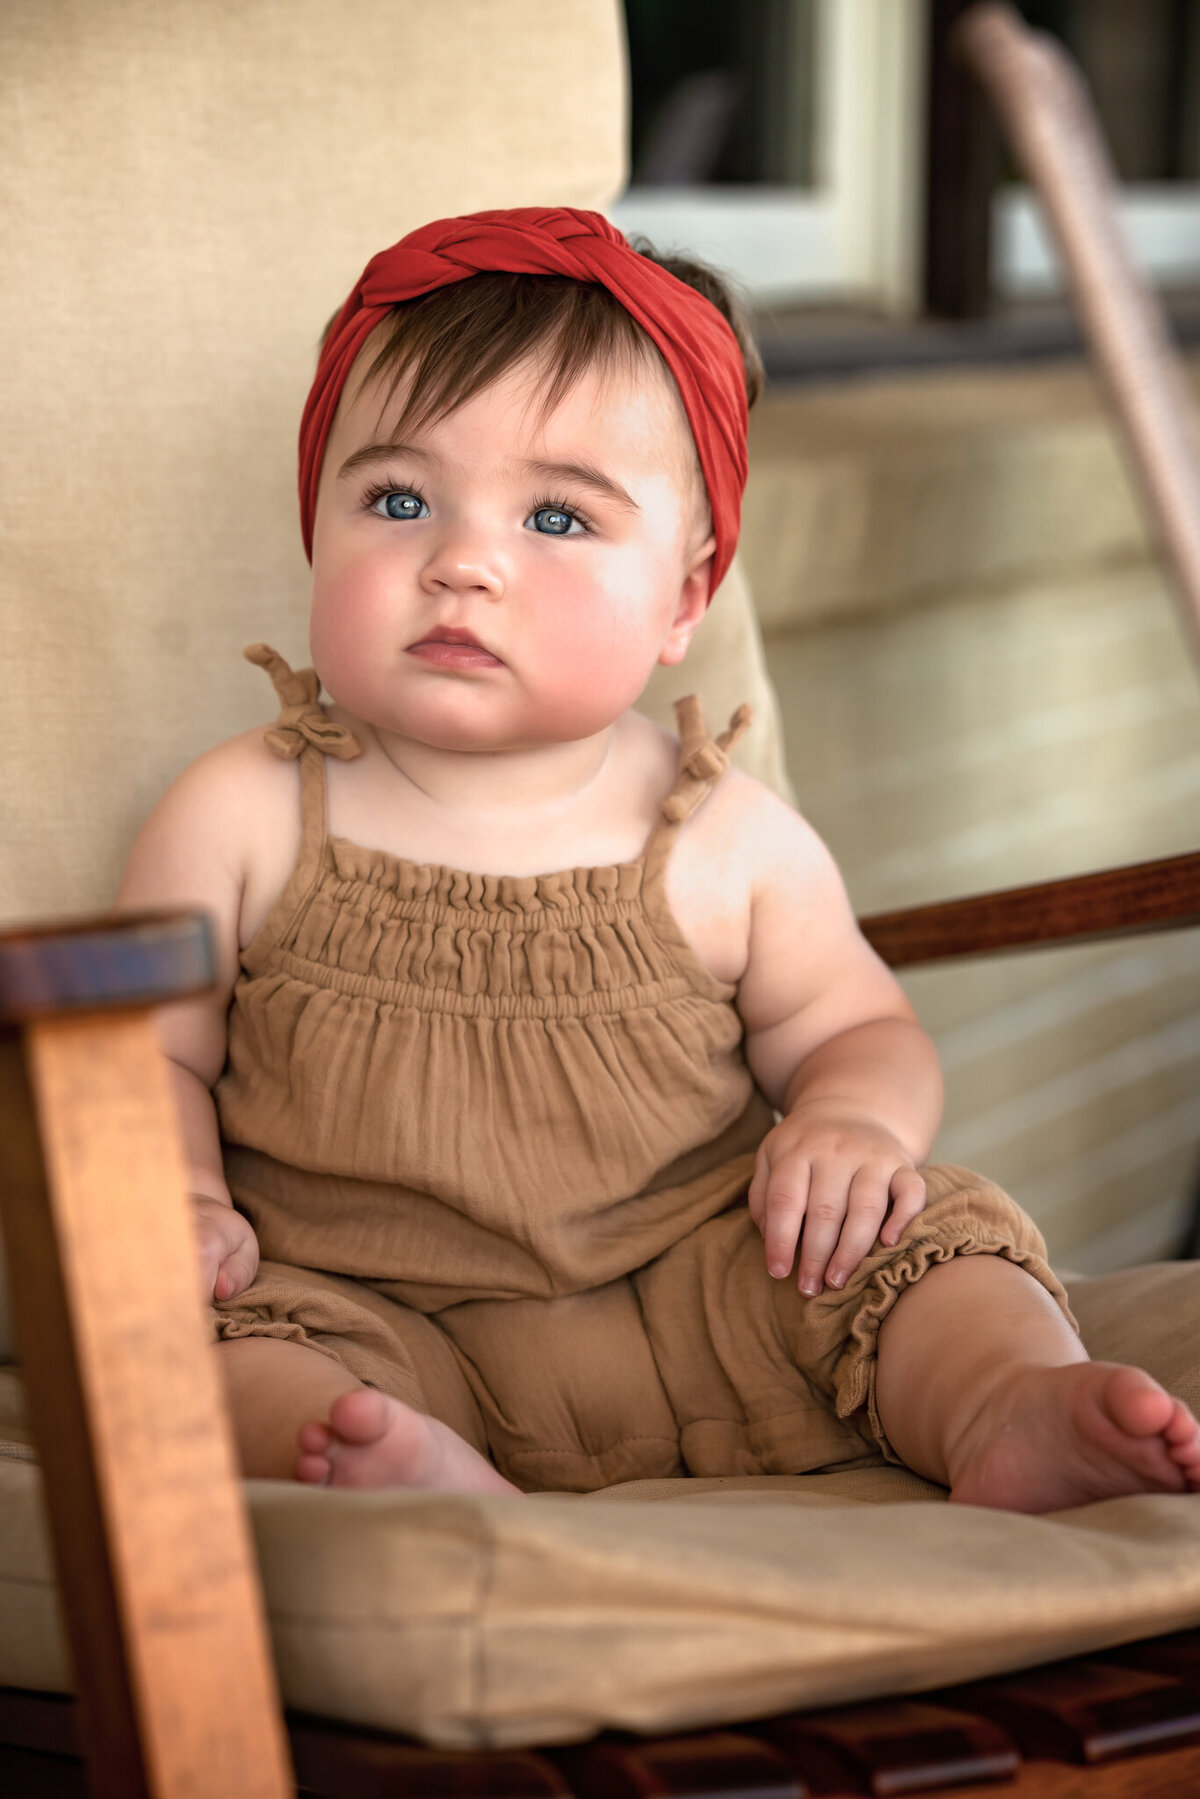 A baby girl is wearing a red headband and sitting on a wooden chair.